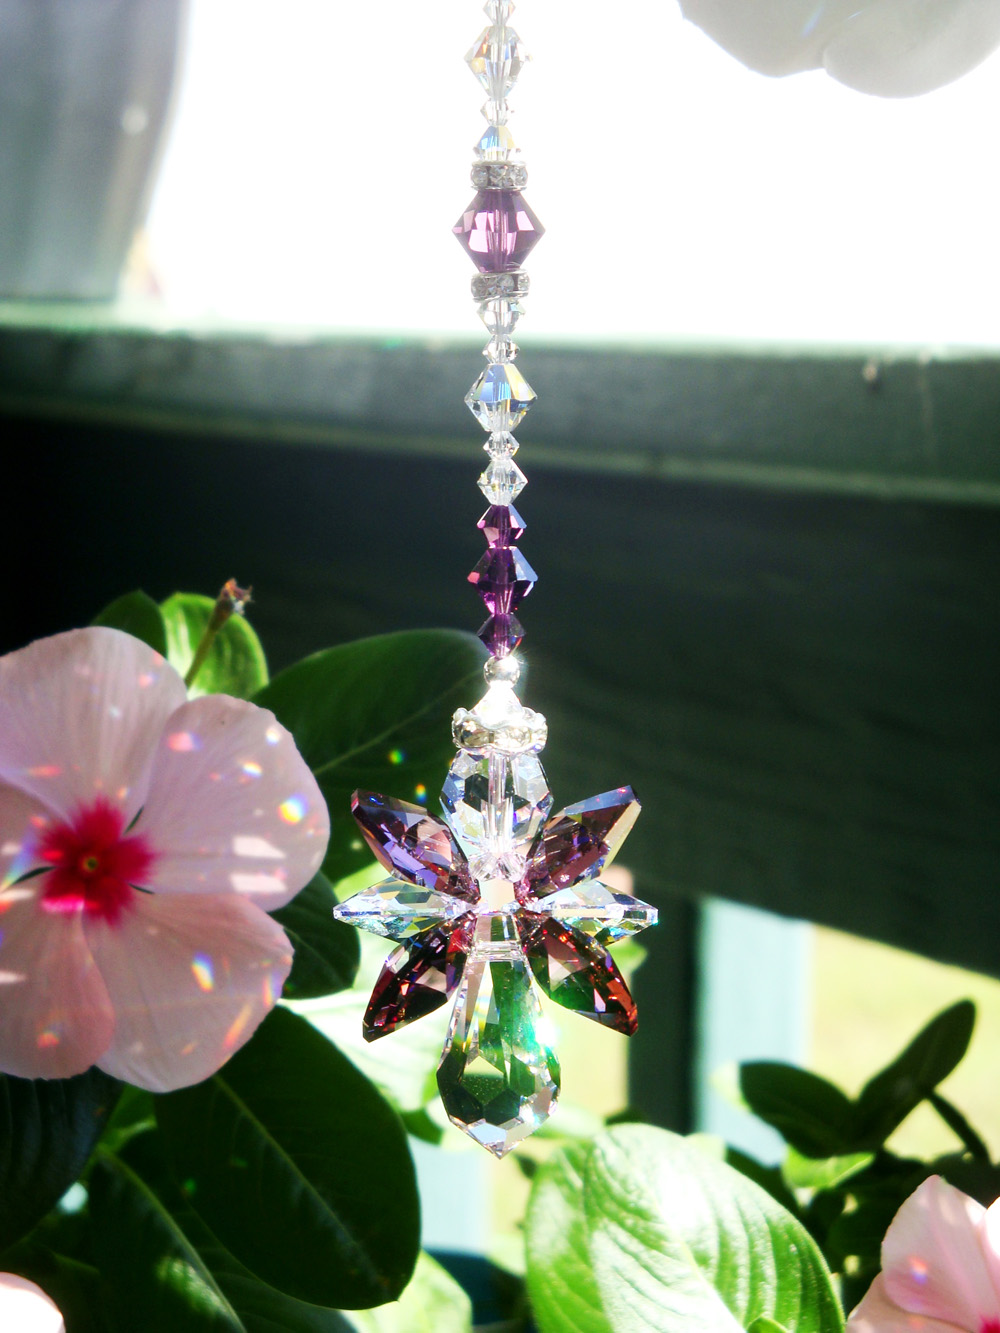 Angel Rear View Mirror Charm, Purple Crystal Angel for Car Rearview Mirror